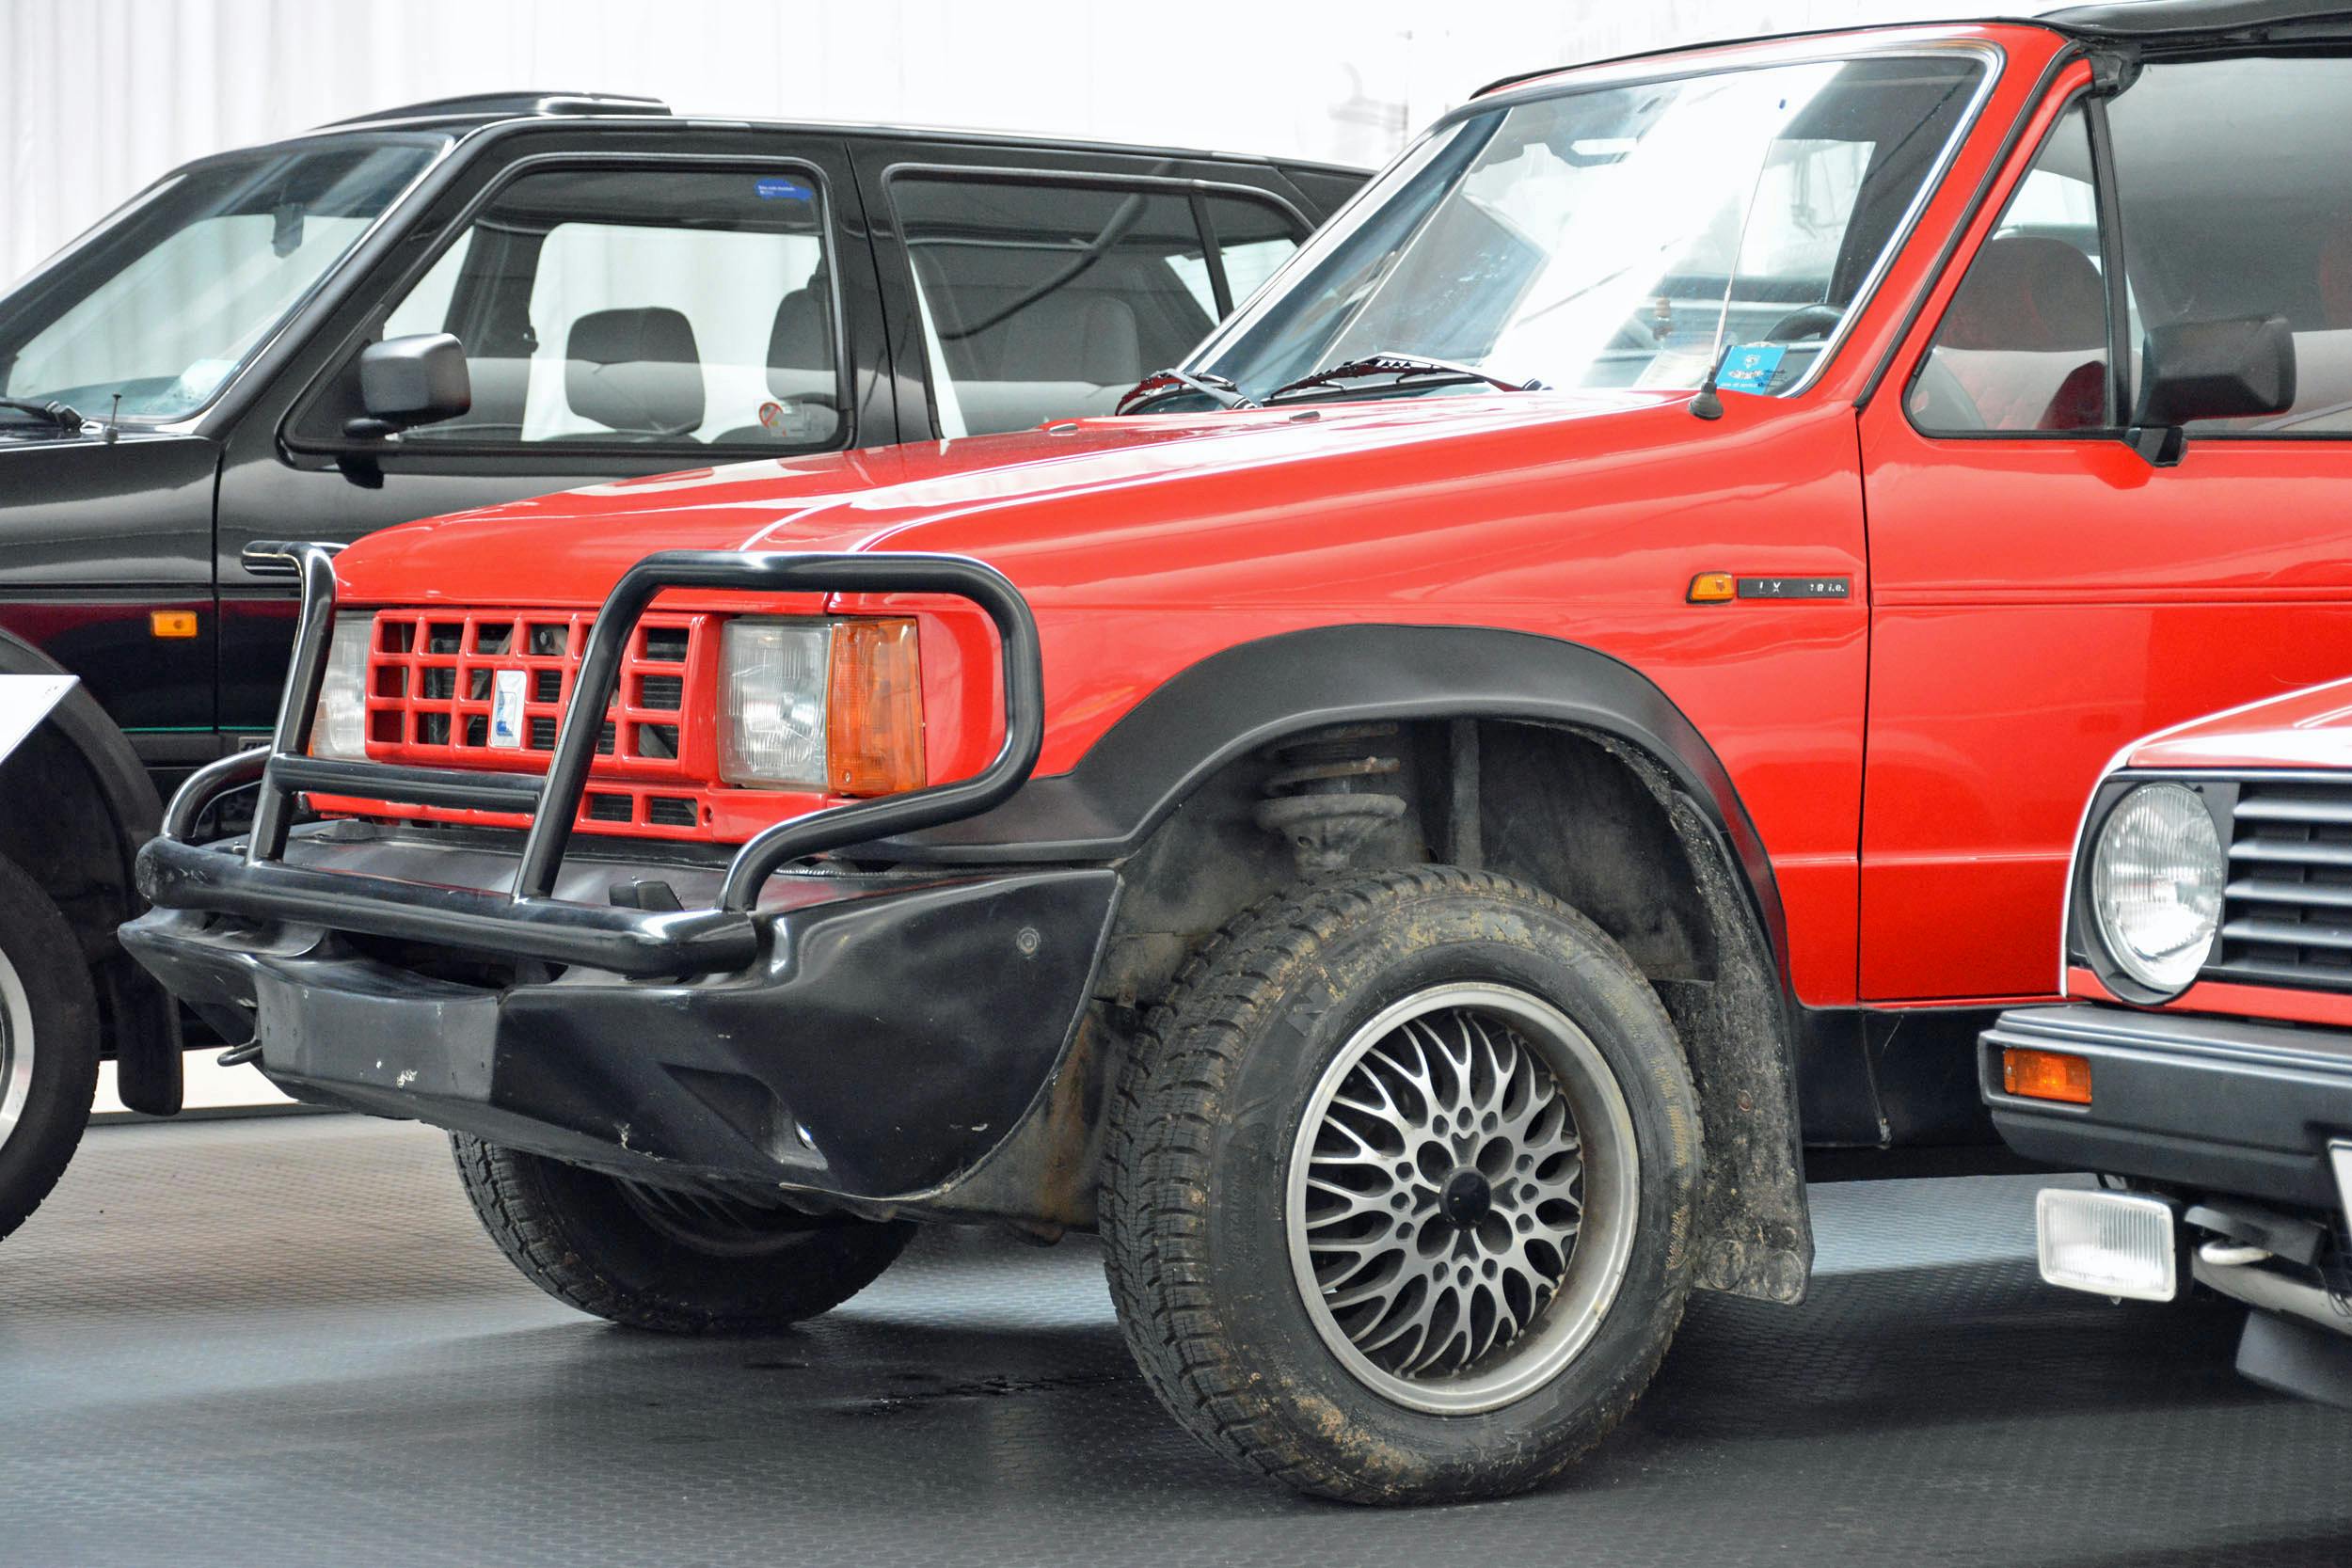 Biagini Passo VW-based 4x4 front end